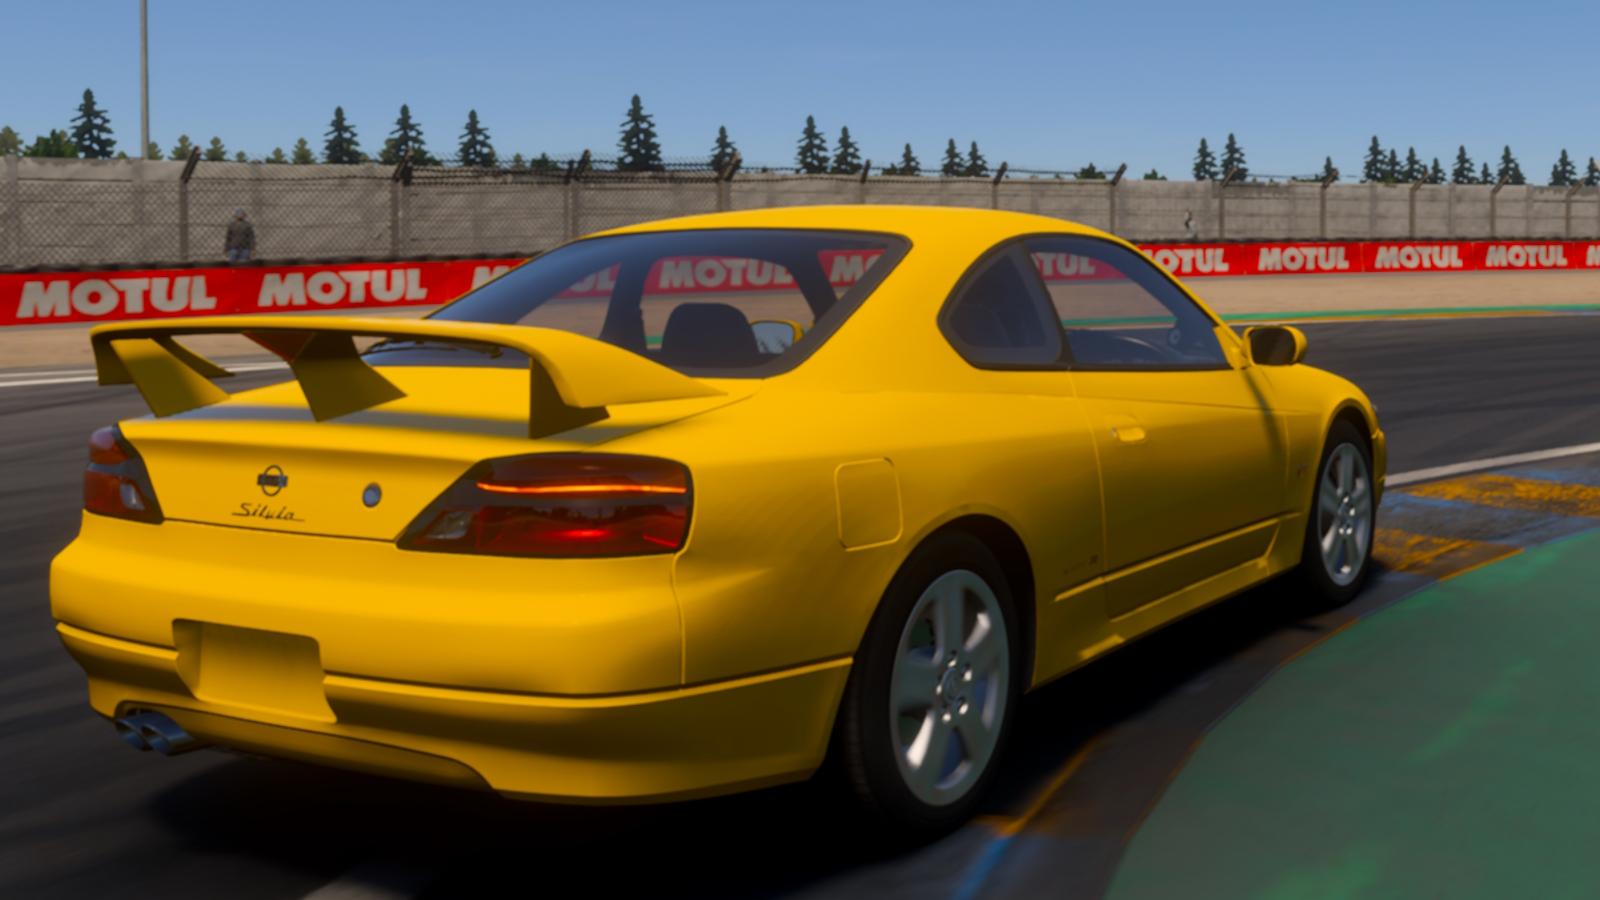 2000 Nissan Silvia using oudated model from Forza Motorsport 3 in new reboot.